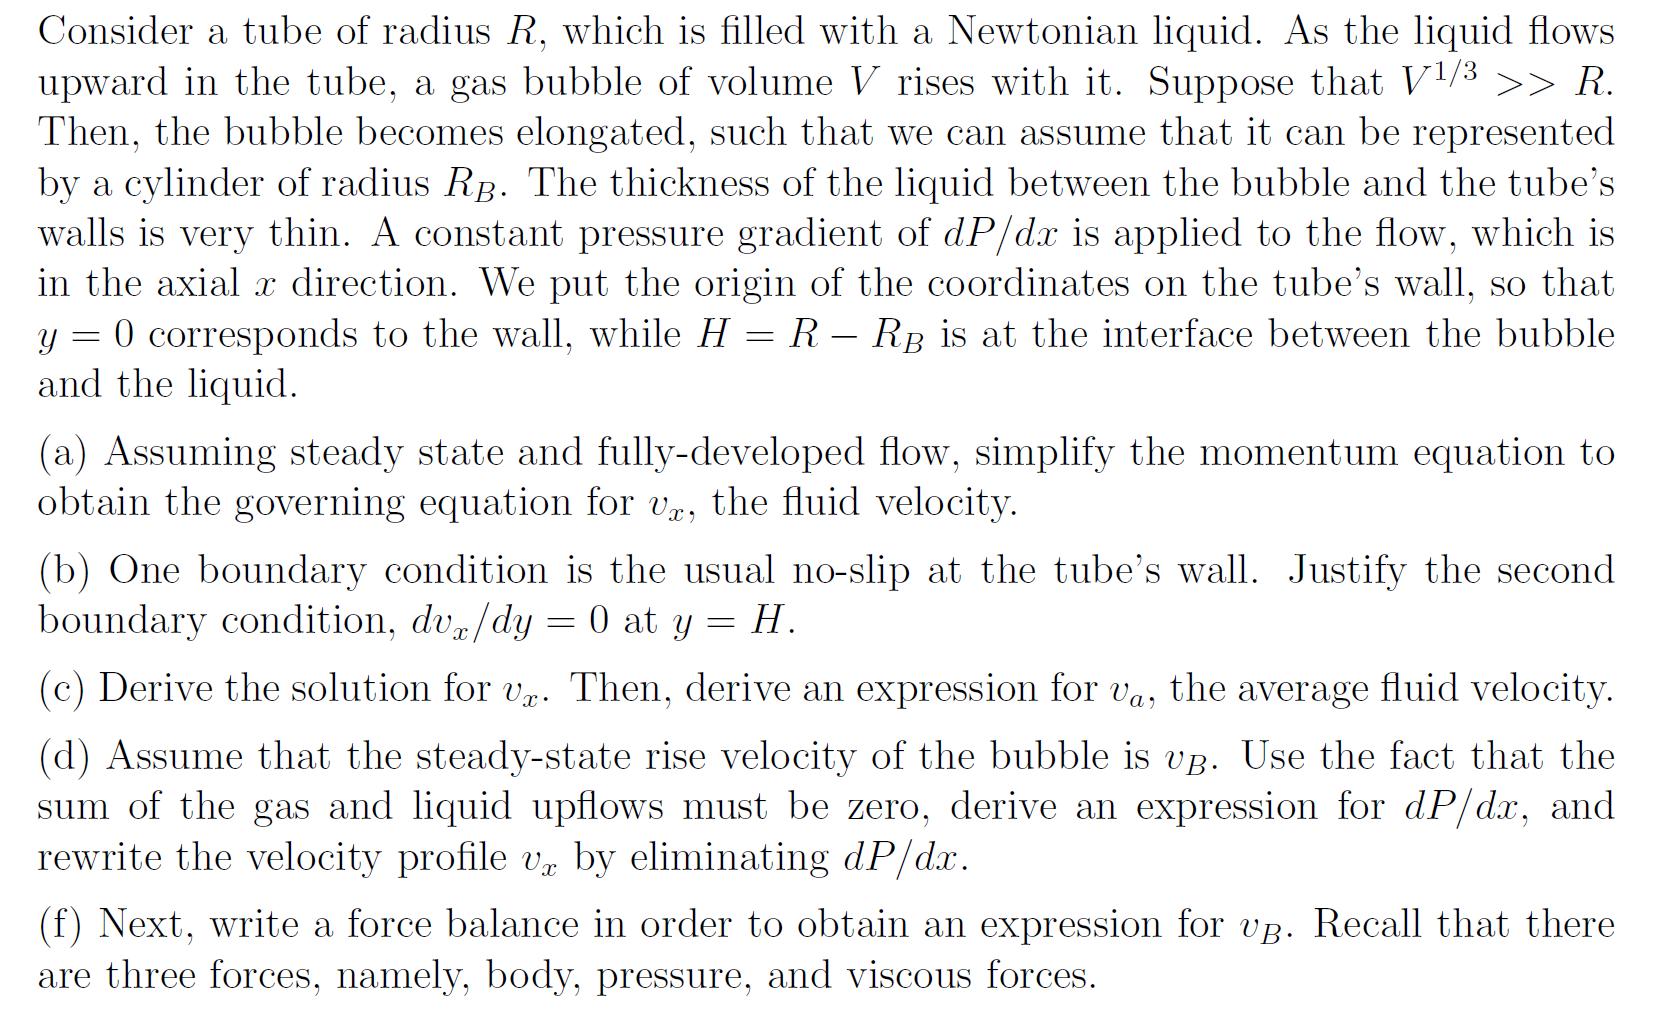 Consider a tube of radius R, which is filled with a Newtonian liquid. As the liquid flows upward in the tube,